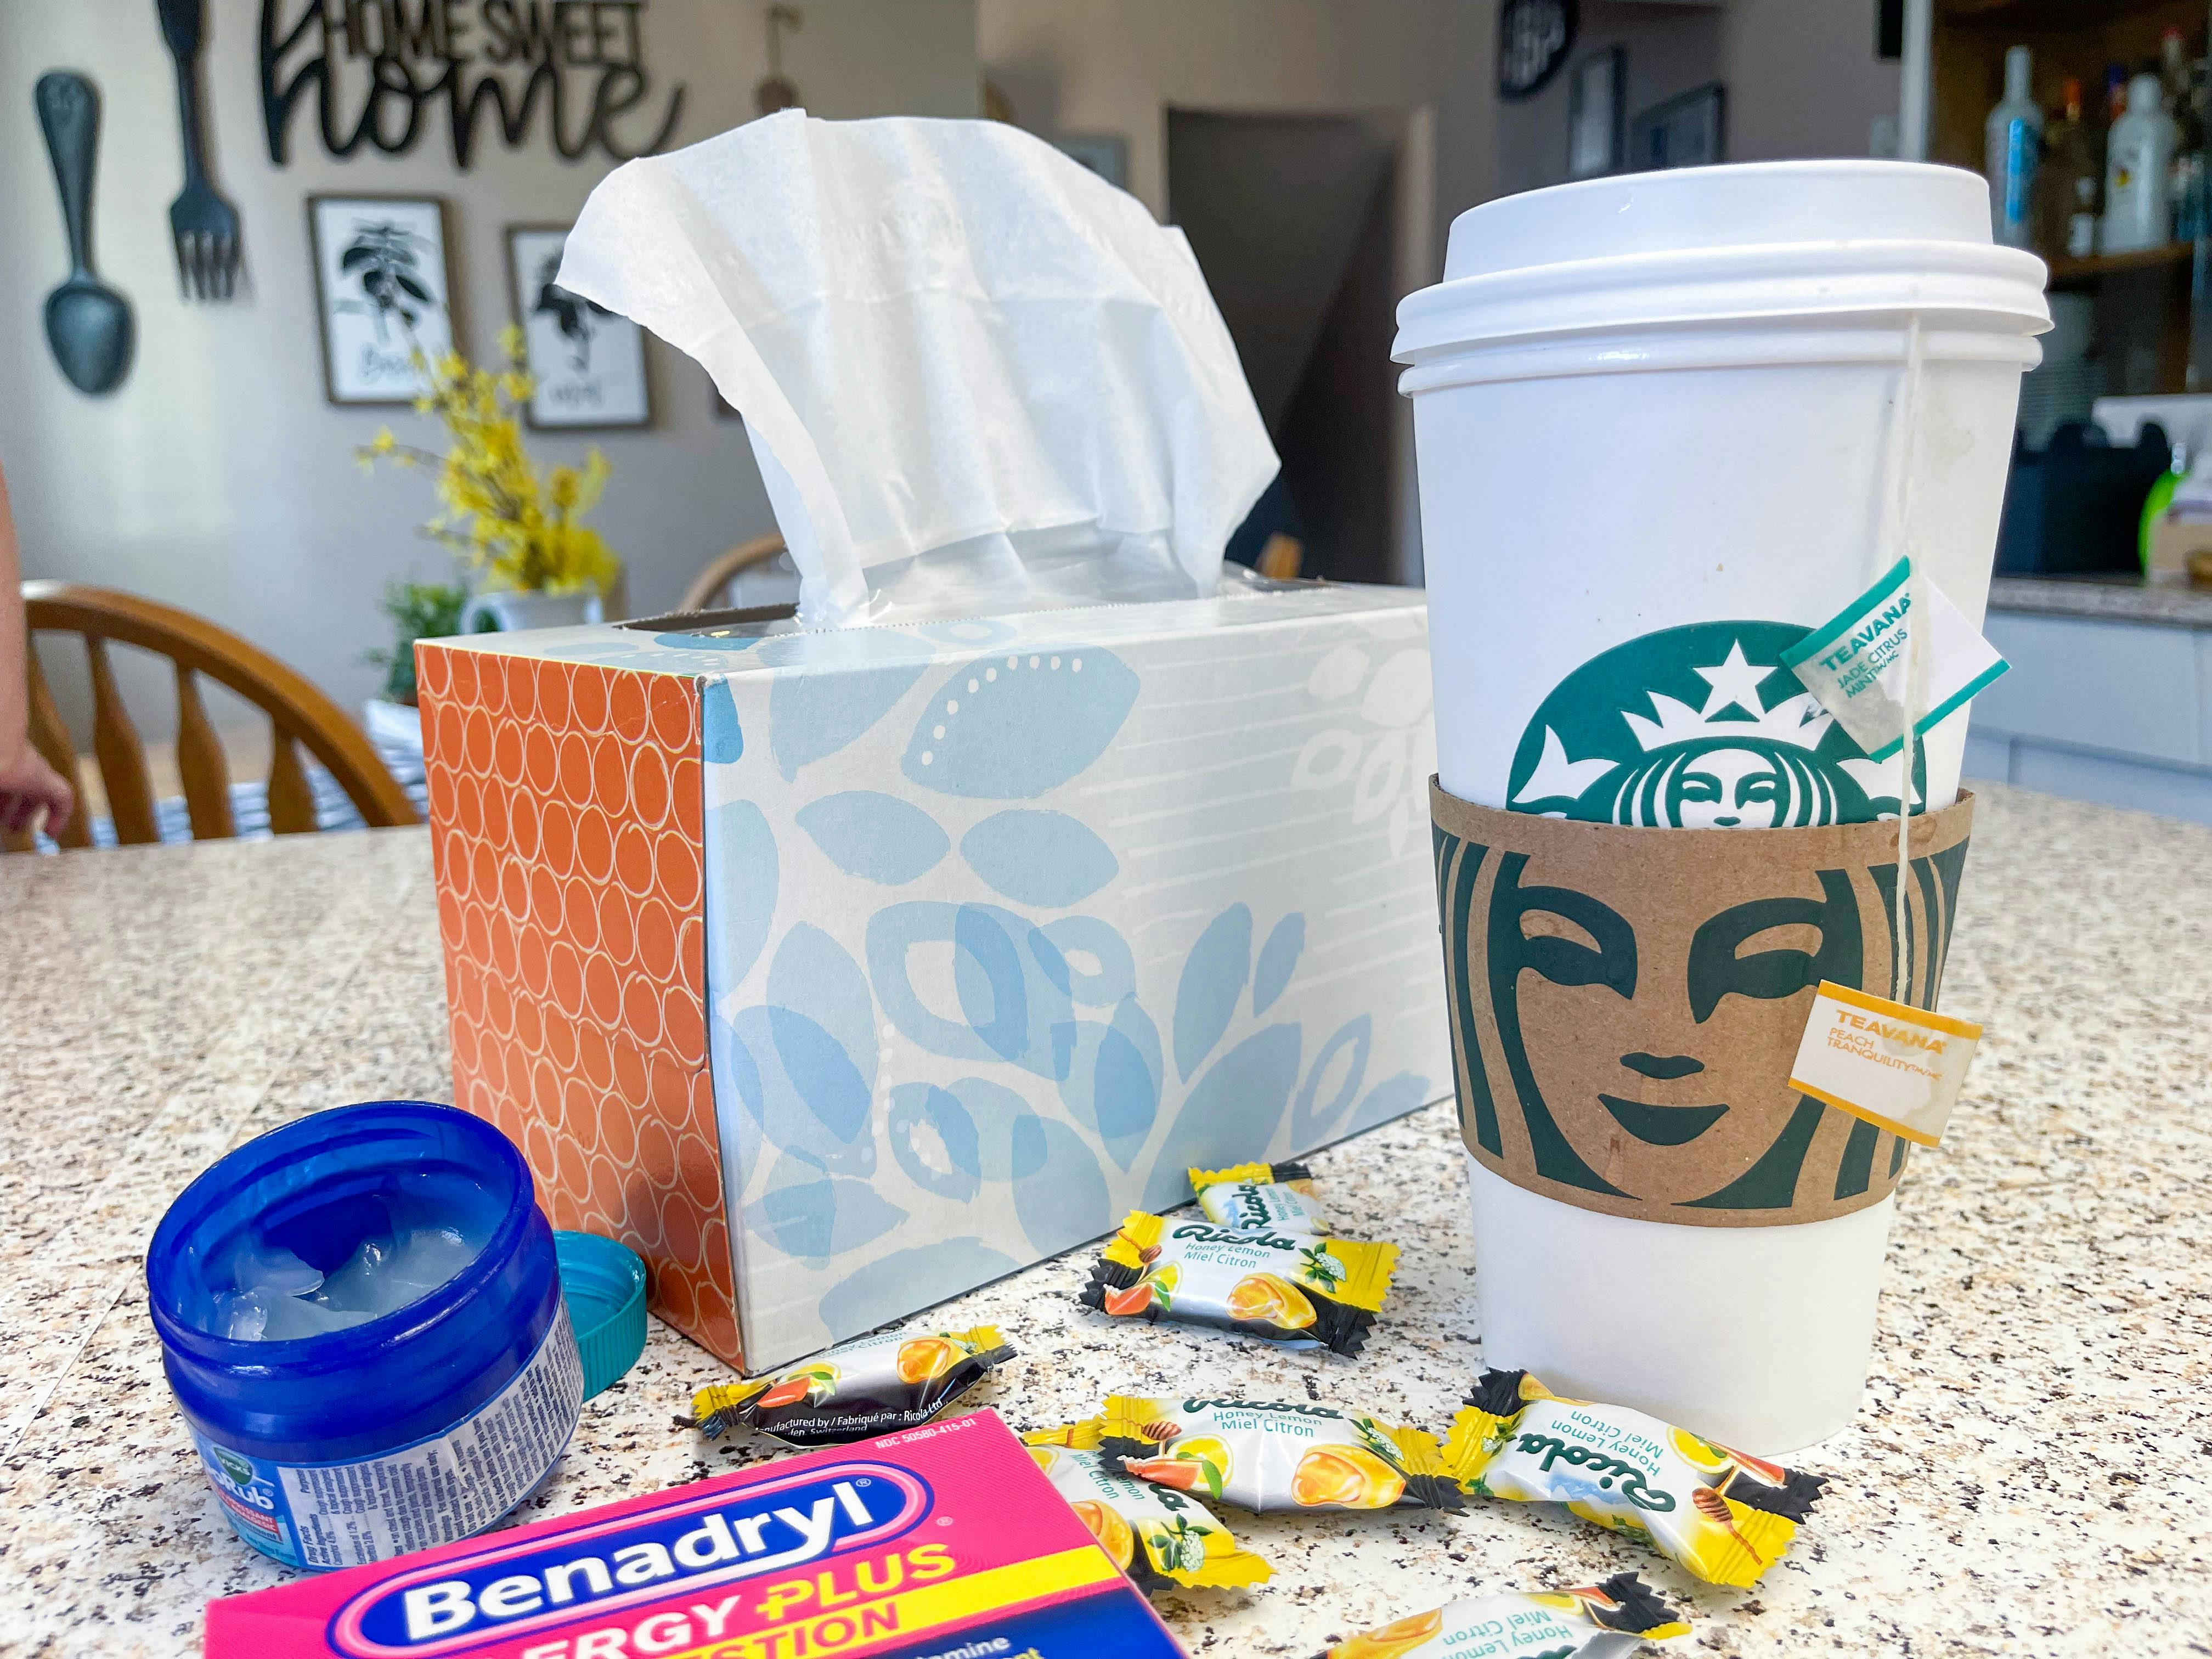 A Starbucks tea on a counter near a box of cold medicine and tissues.